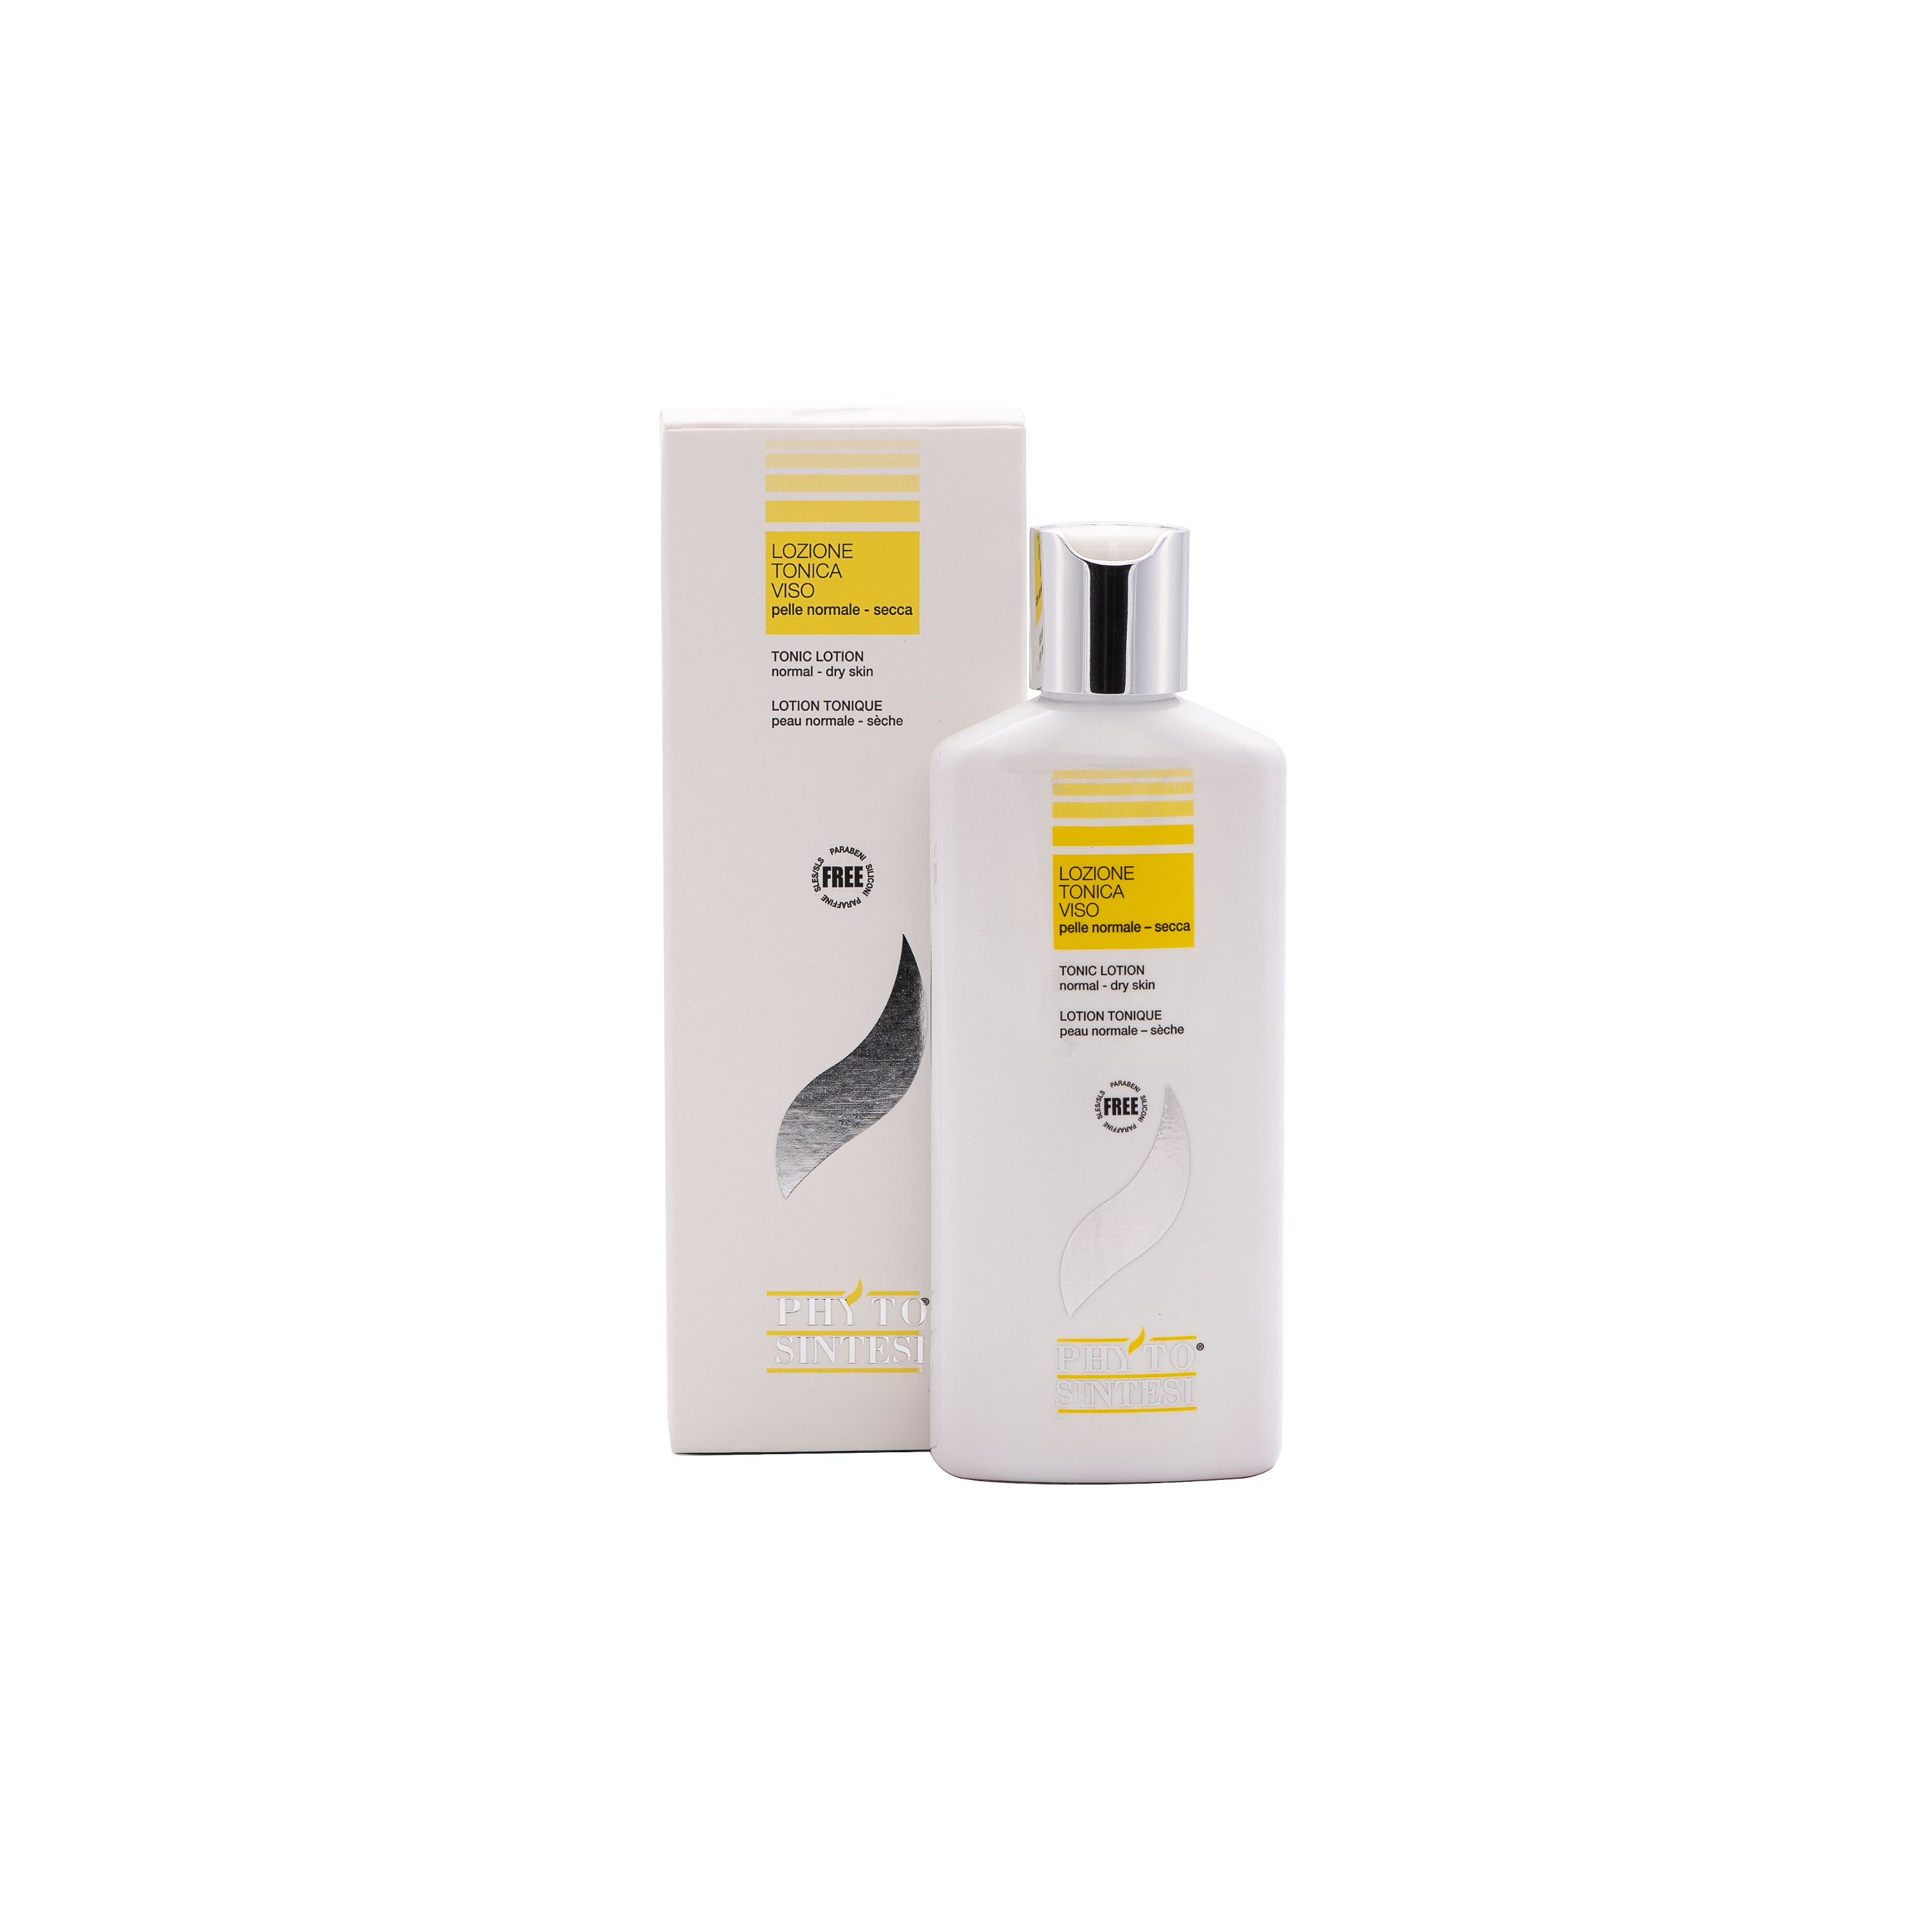 Tonic Lotion Normal - Dry Skin